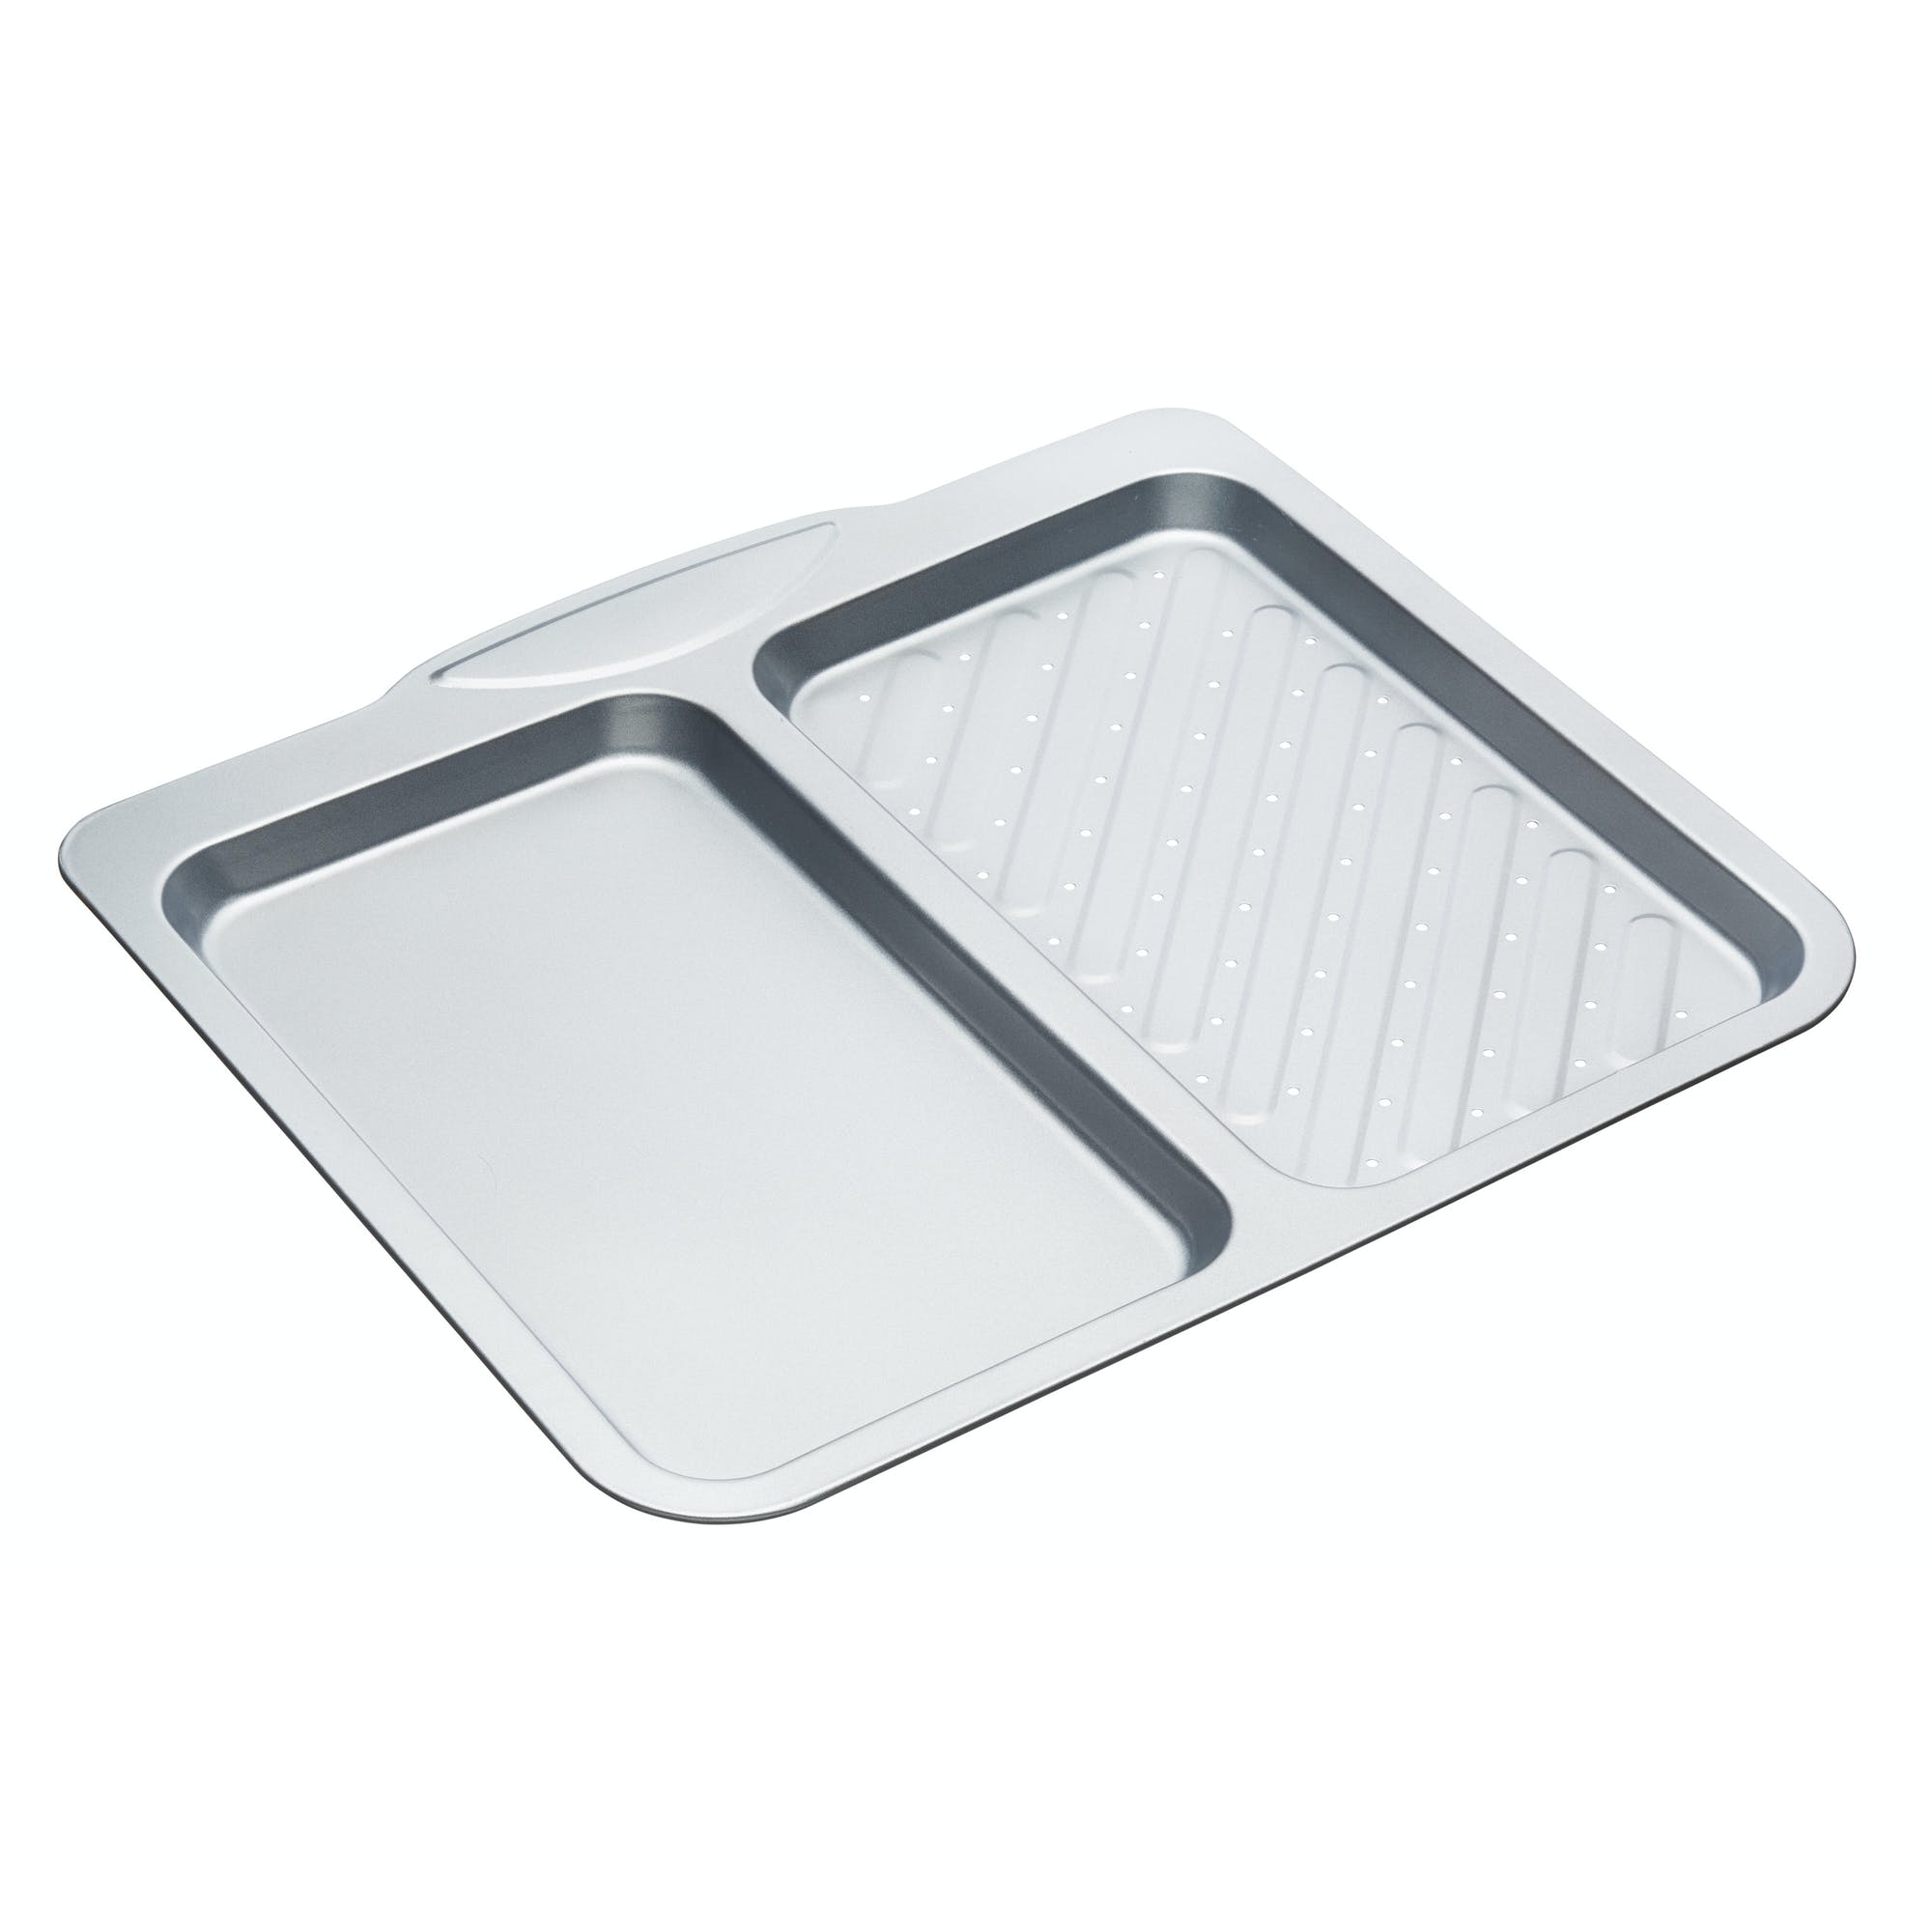 KitchenCraft Heavy Duty Non-Stick Two Part Oven Tray - The Cooks Cupboard Ltd